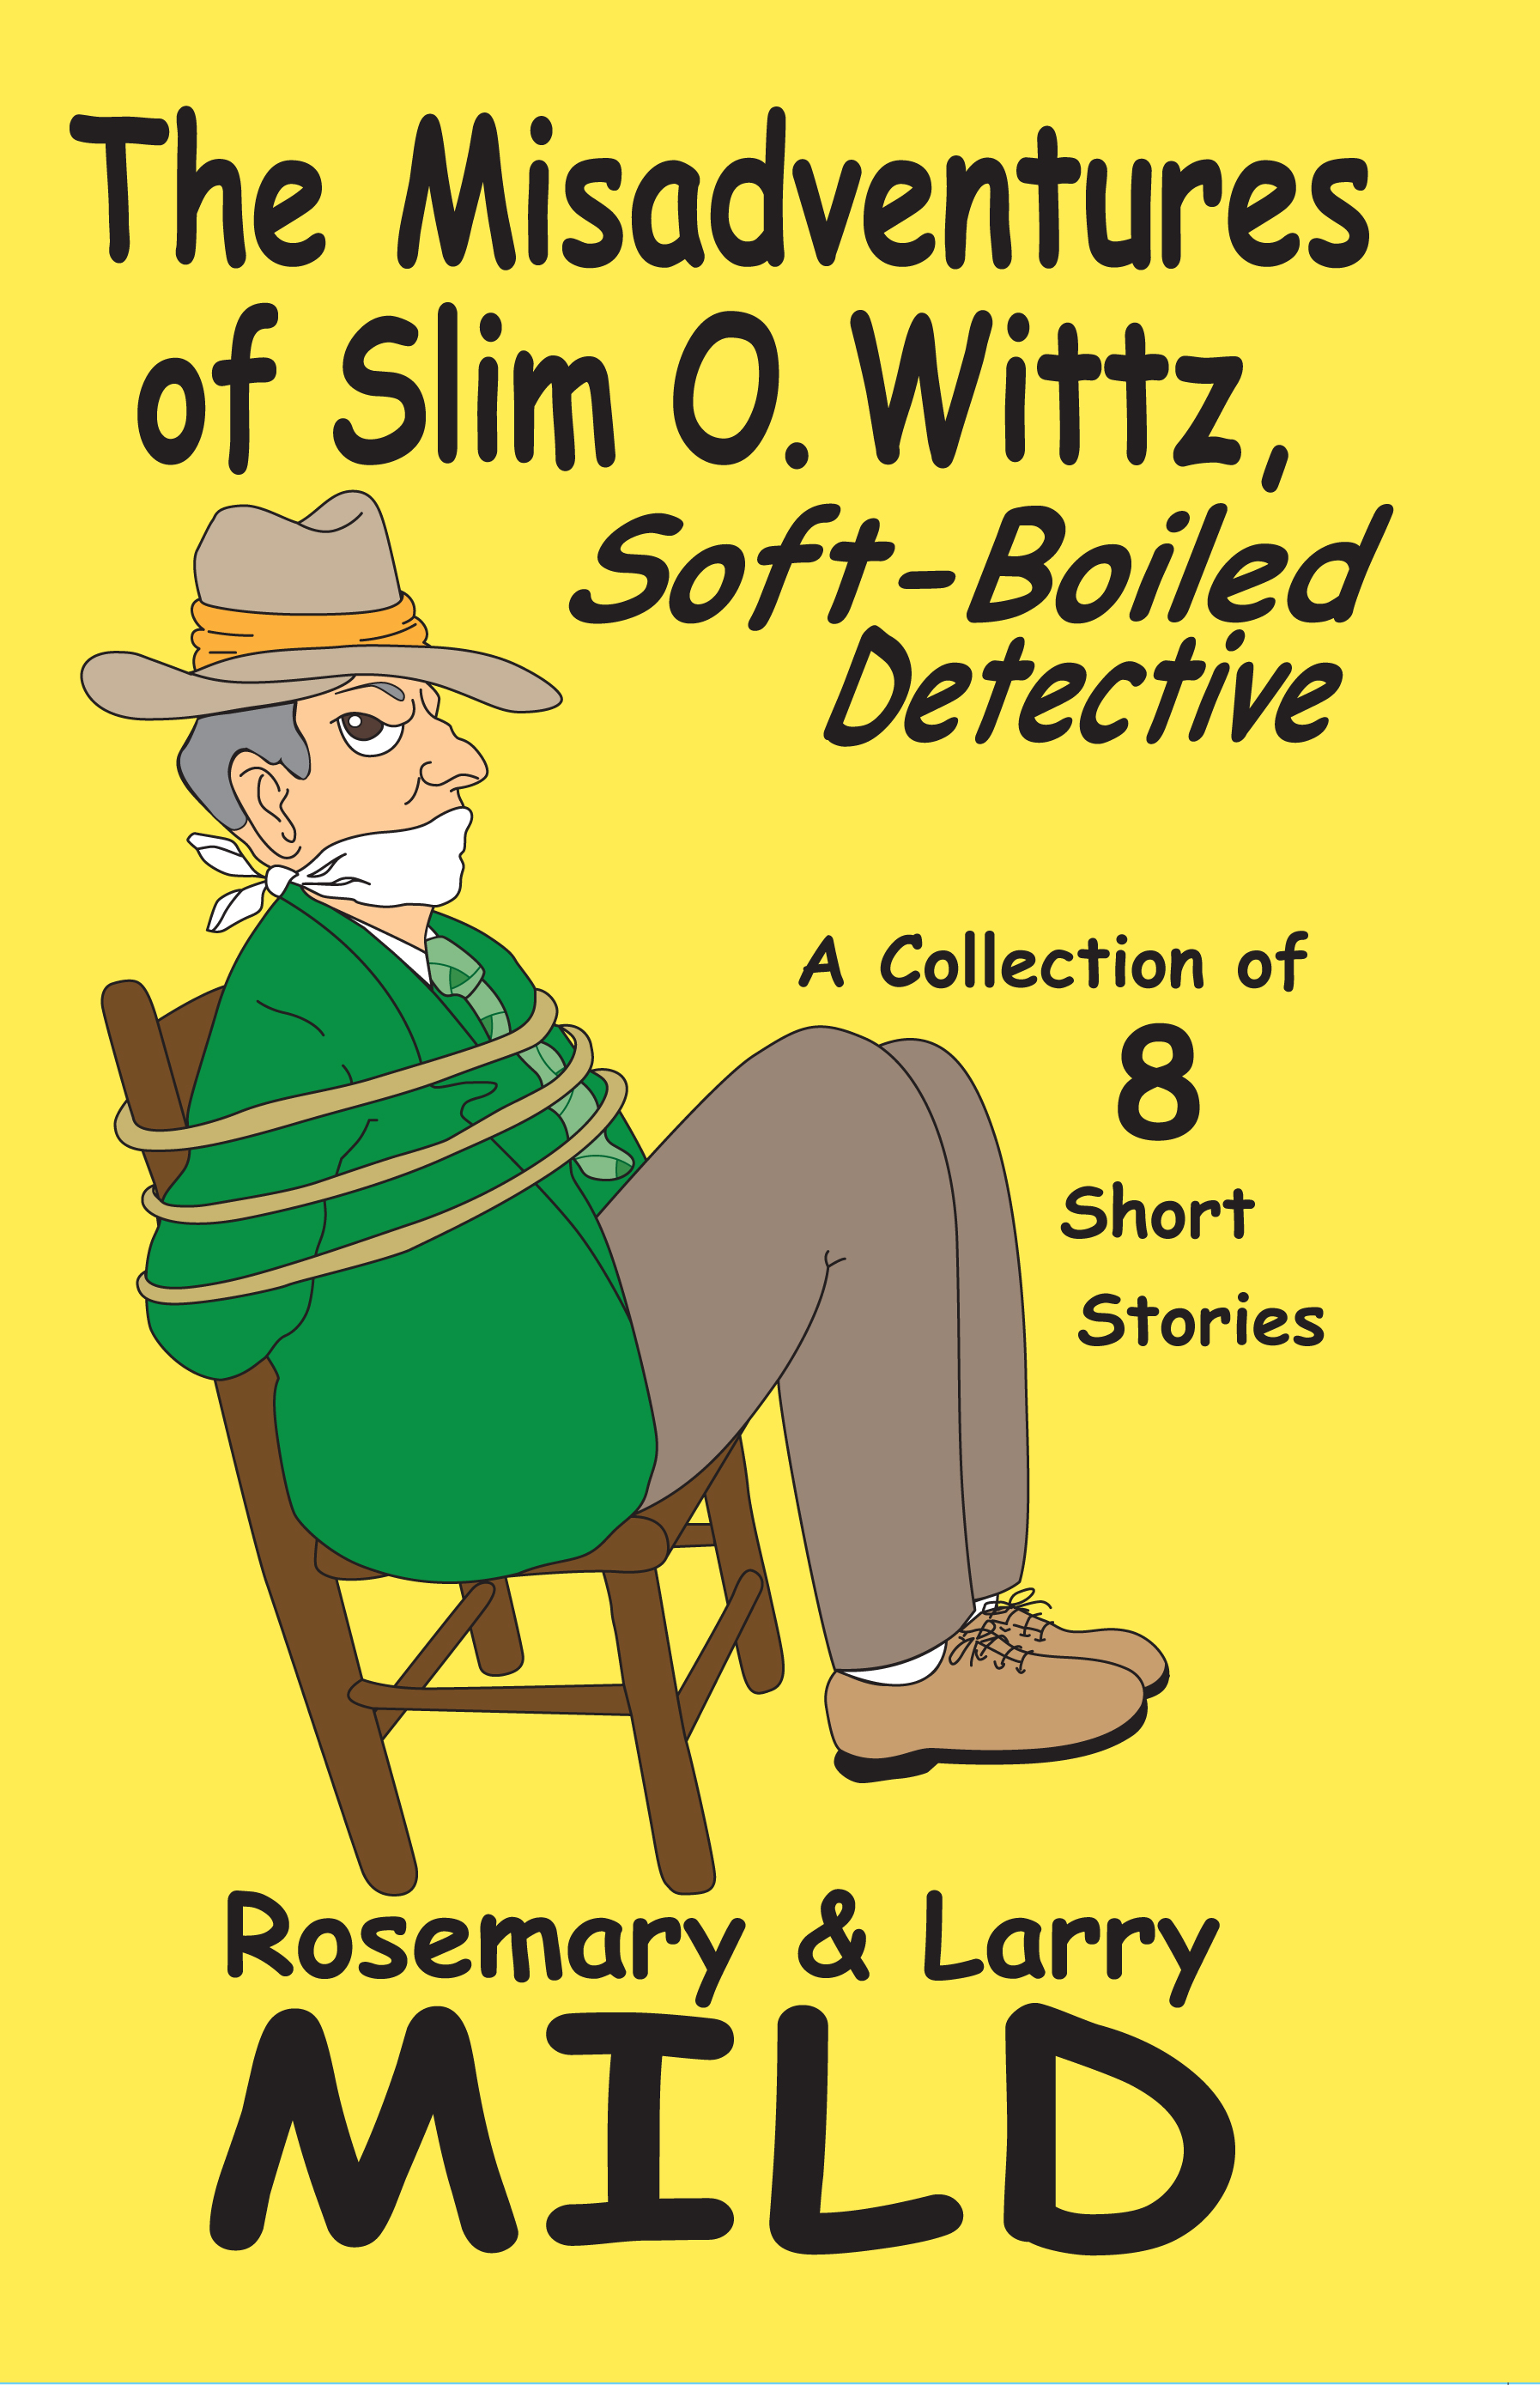 Slim O. Wittz, Soft-Boiled Detective by Larry and Rosemary Mild